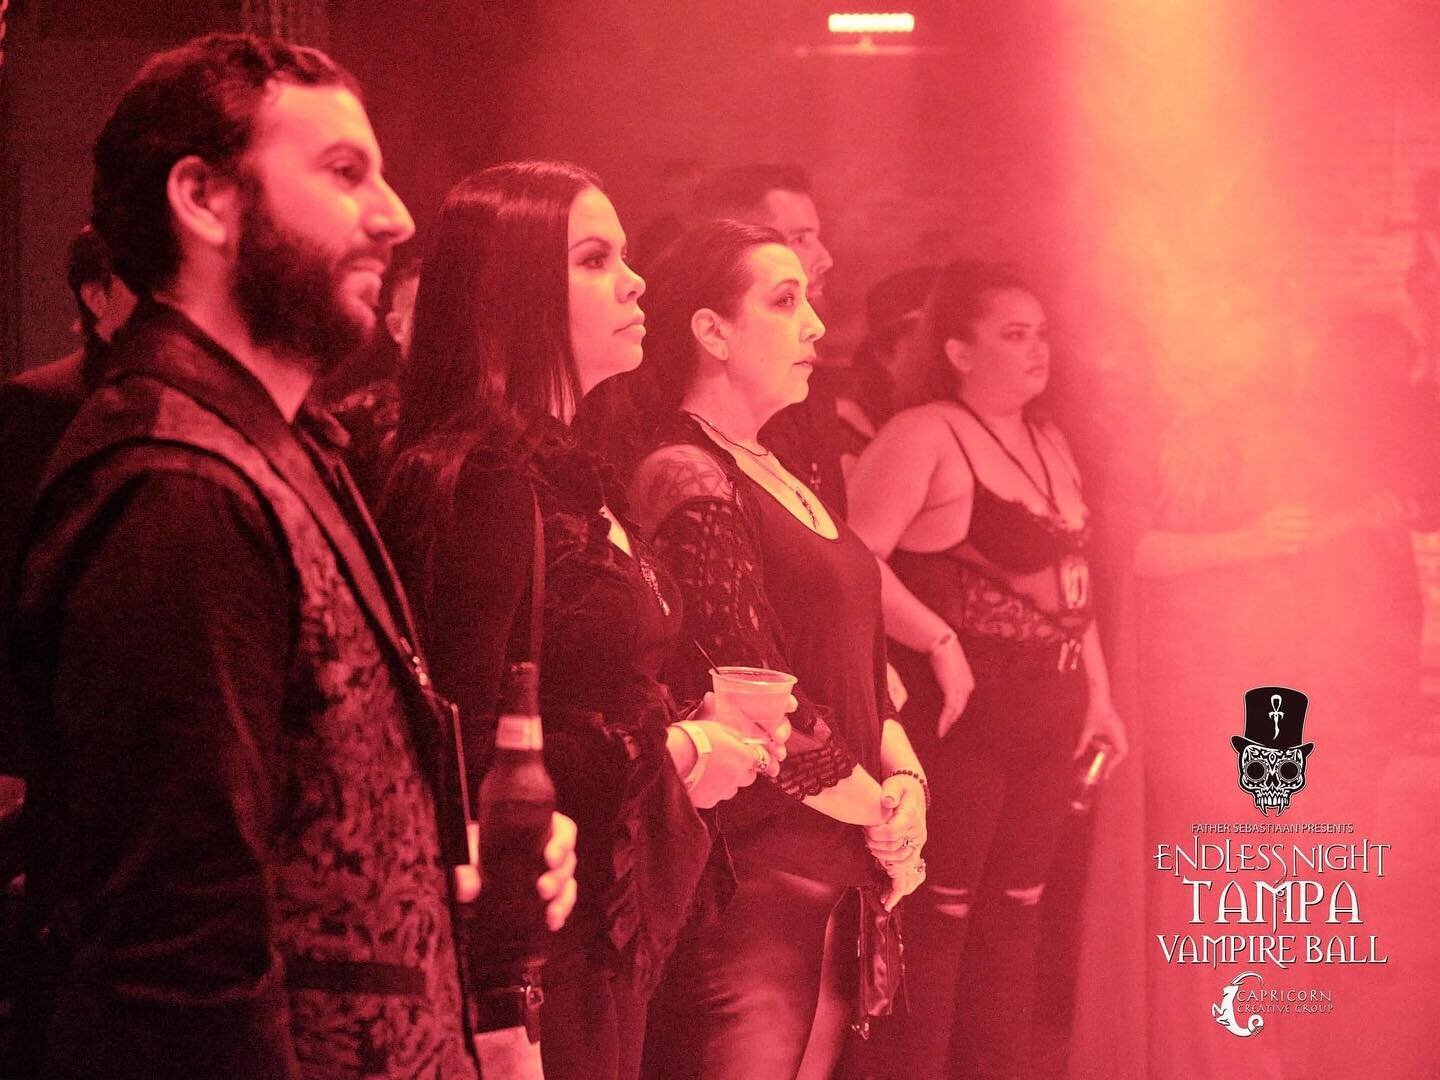 Join us for the Tampa Vampire Ball! 🦇🦇🦇

Endless Night : Tampa Vampire Ball will take place on Saturday May 20th 2023  10pm to 3am at the legendary Castle Ybor in Tampa Florida.  Entertainment includes live shock magician Dan Sperry, burlesque by 